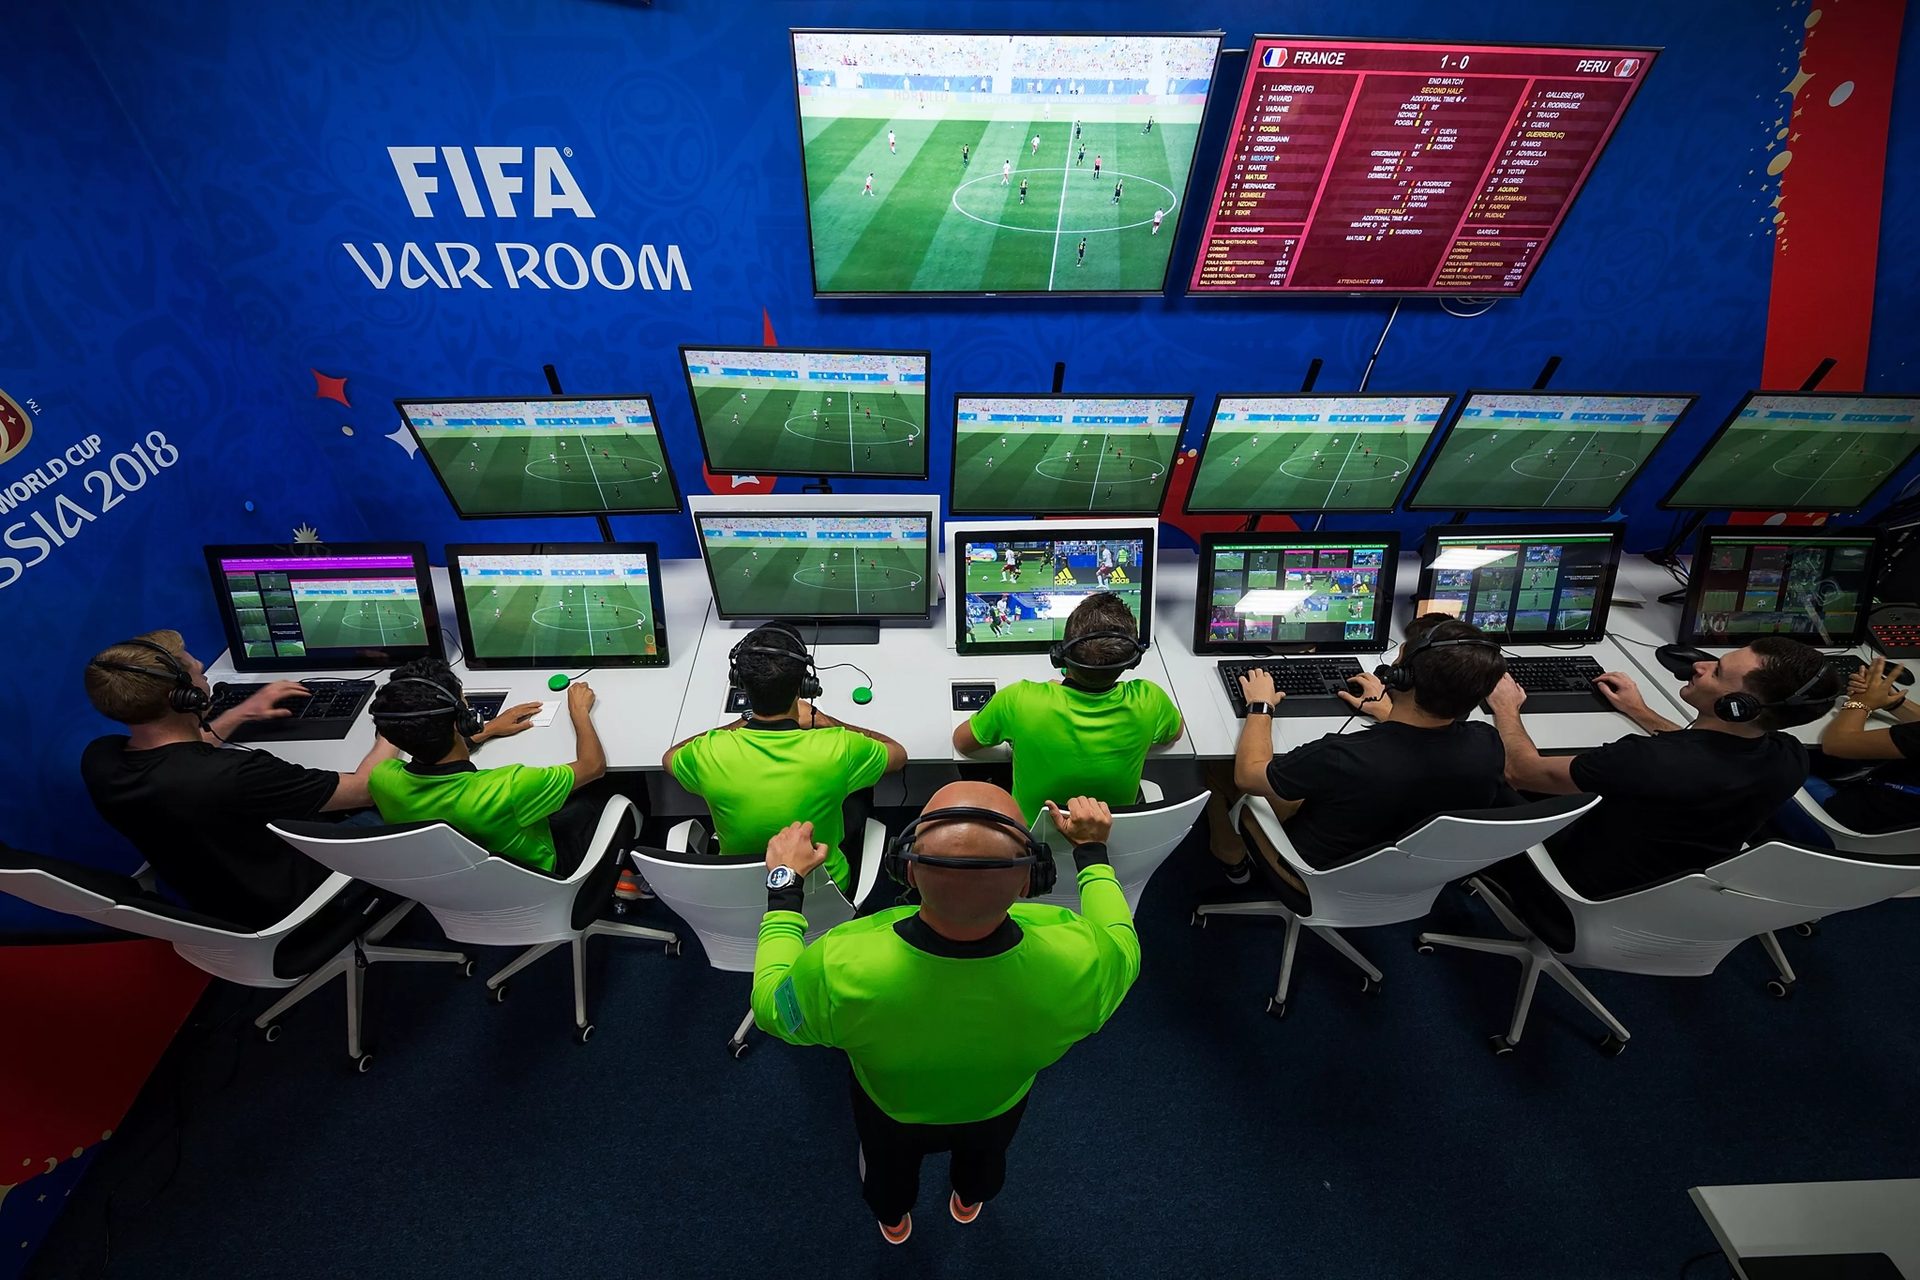 Can Semi-Automated Offside Technology Turn The 2022 World Cup Referees From Wrong Decisions More Quickly?